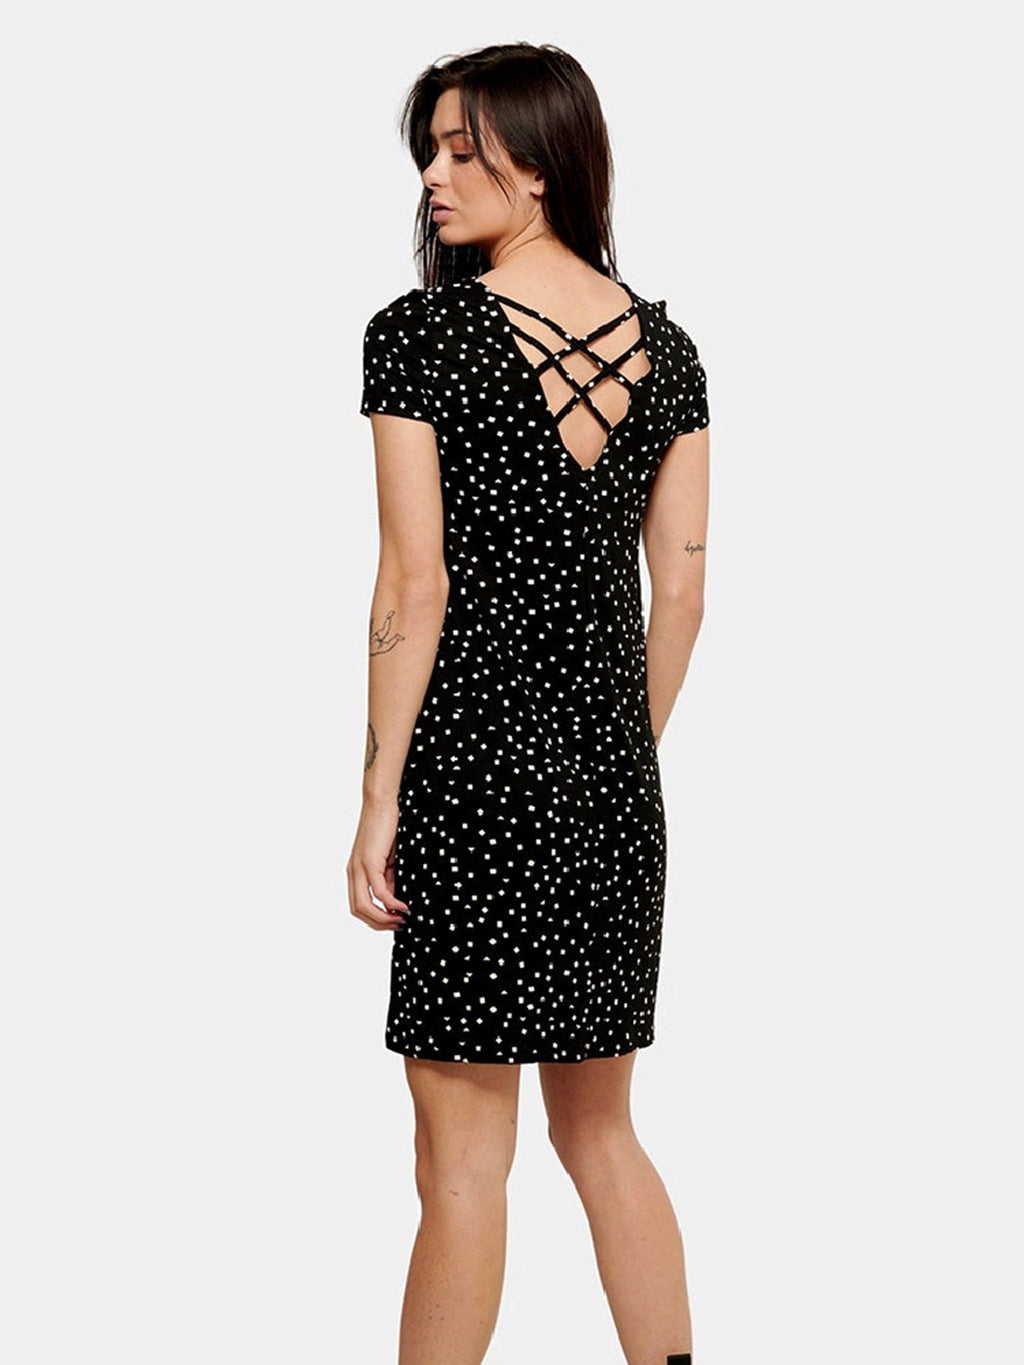 Loose dress with back details - Black triangle square